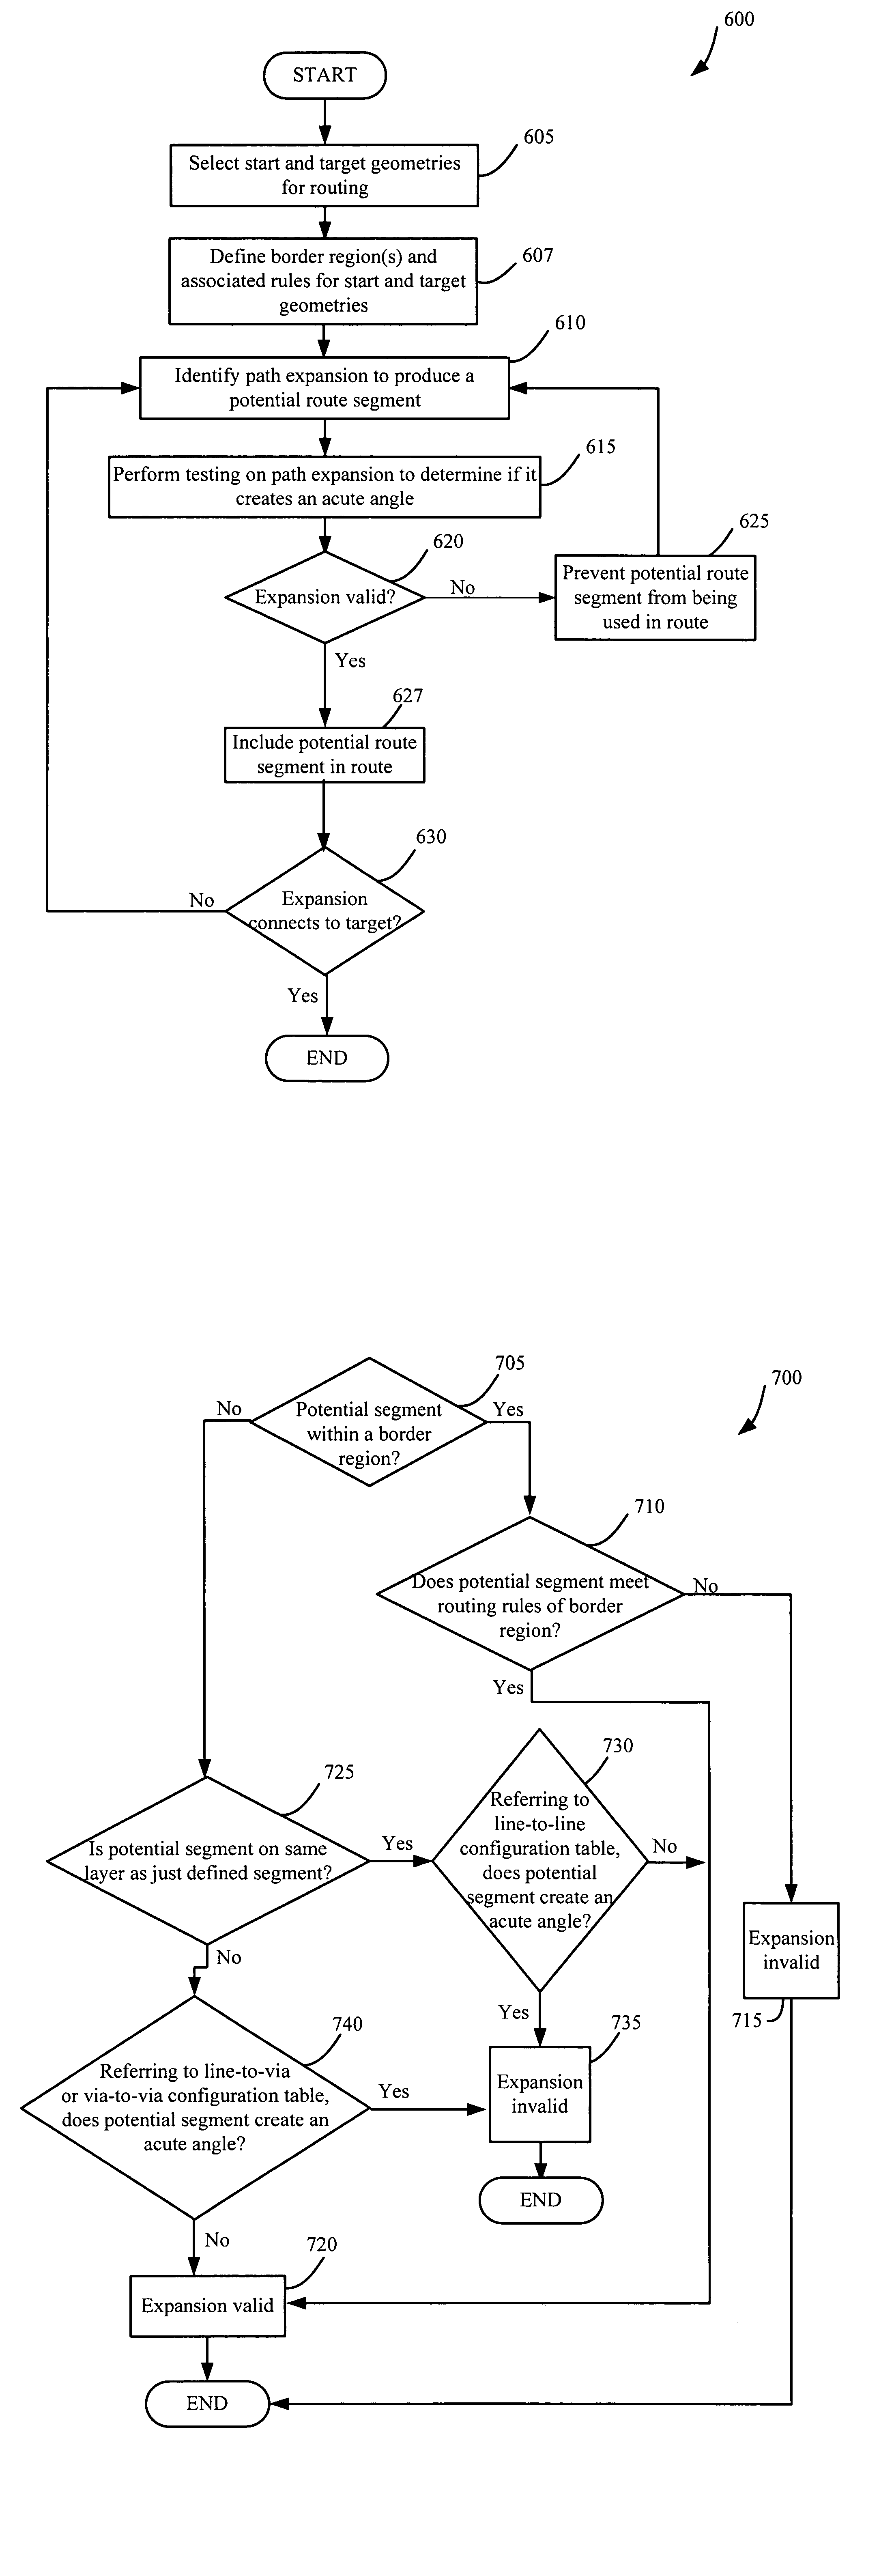 Acute angle avoidance during routing